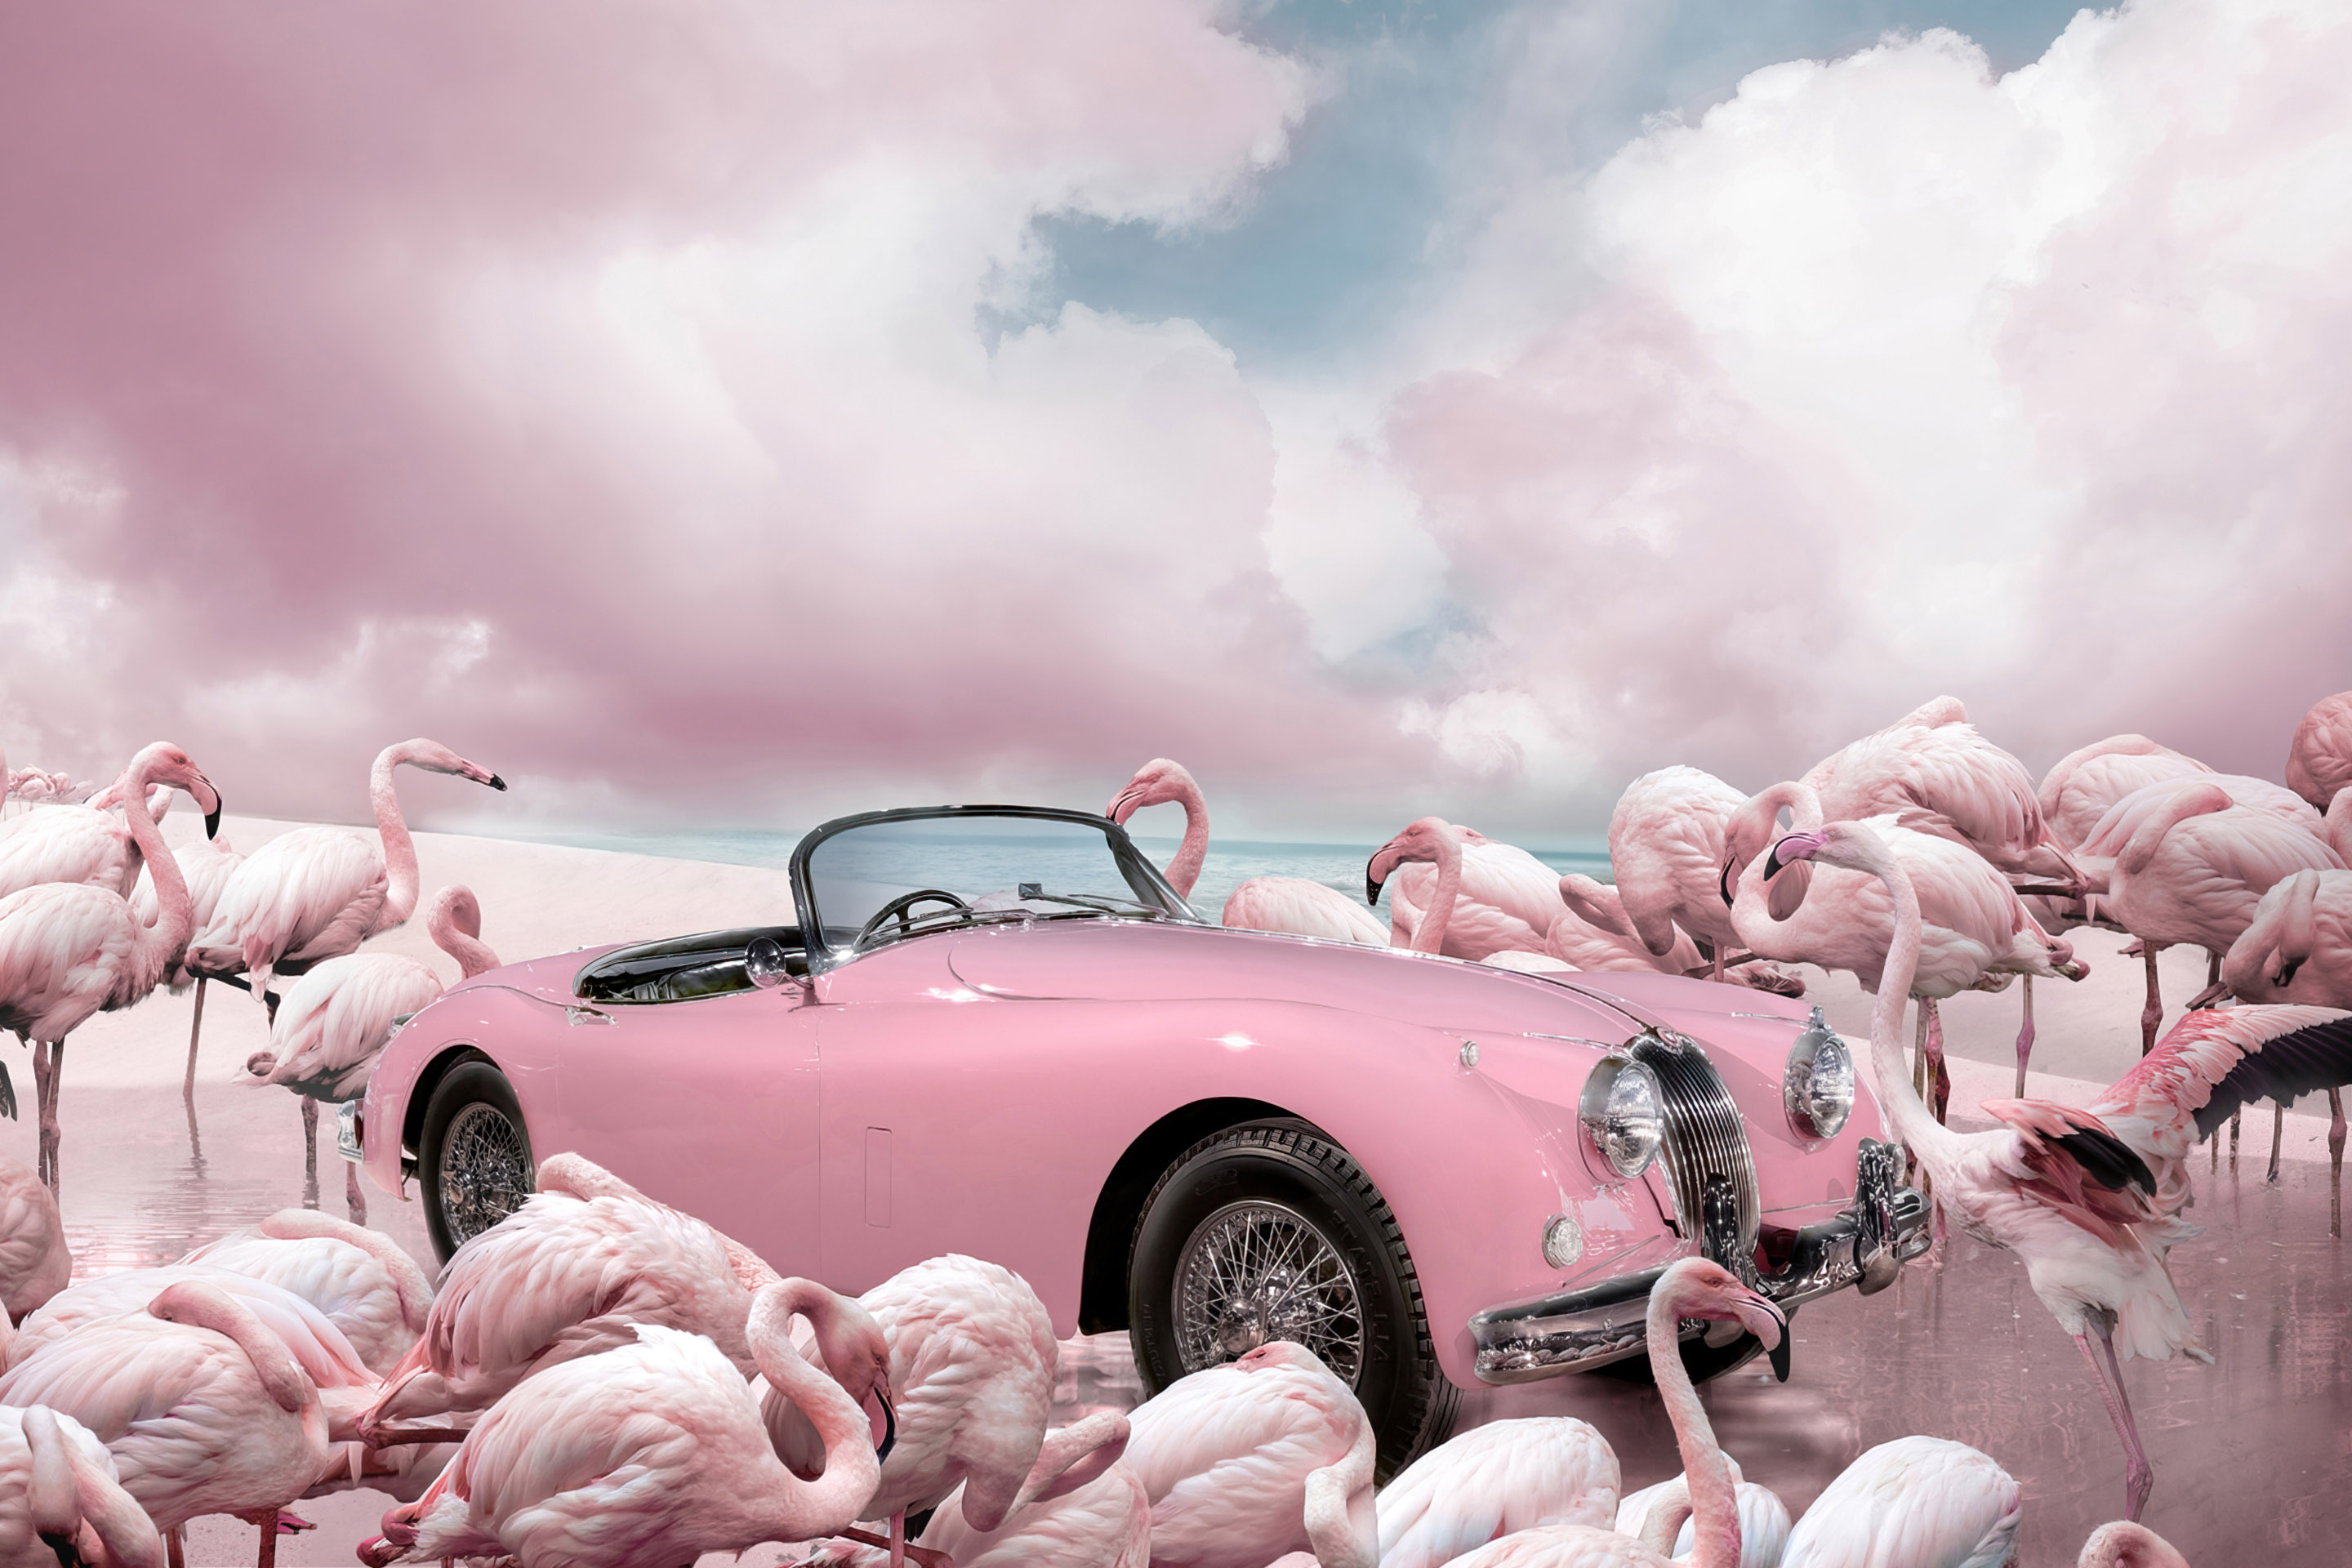 pink jaguar car surrounded by flamingos on a beach